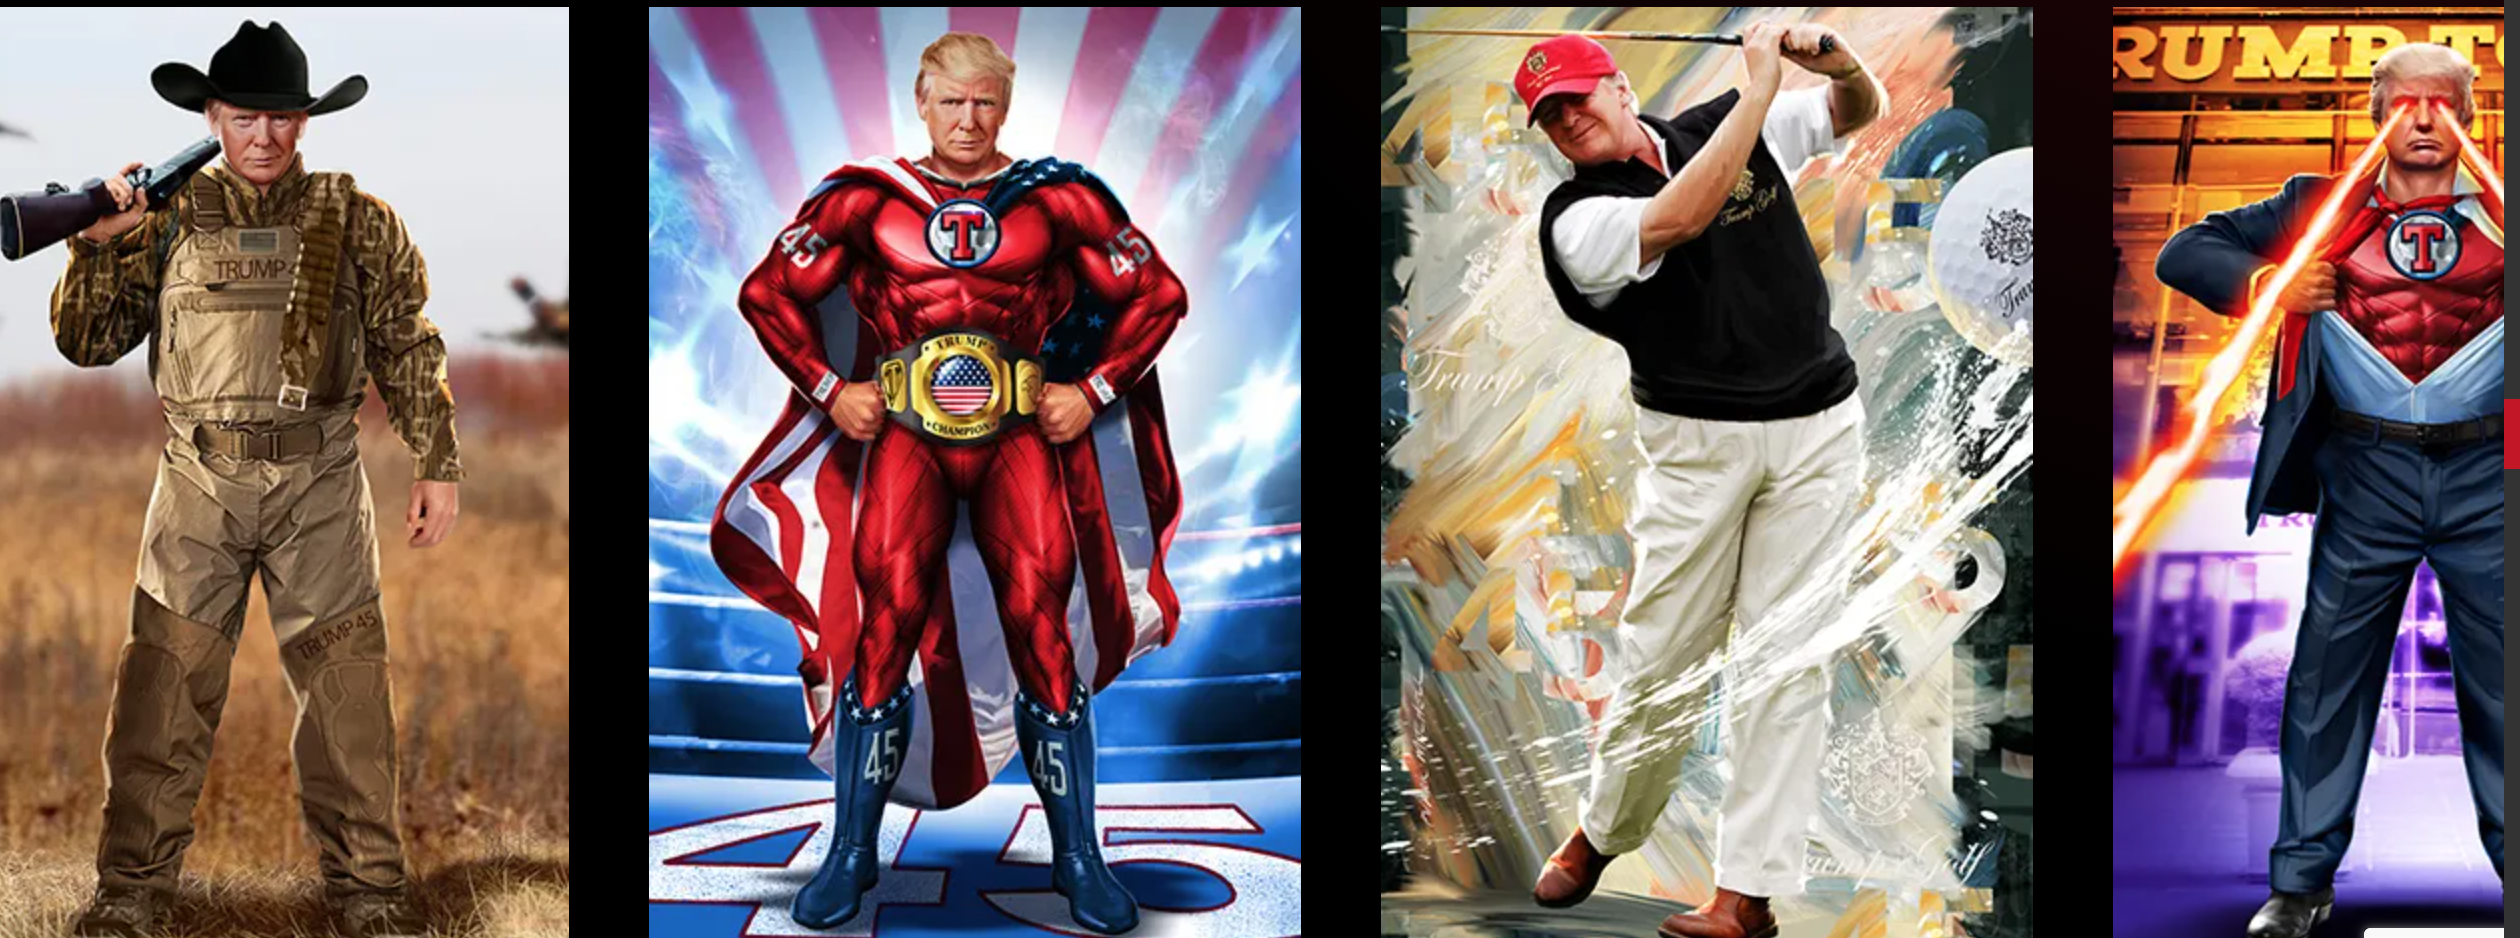 images of donald trump in various costumes